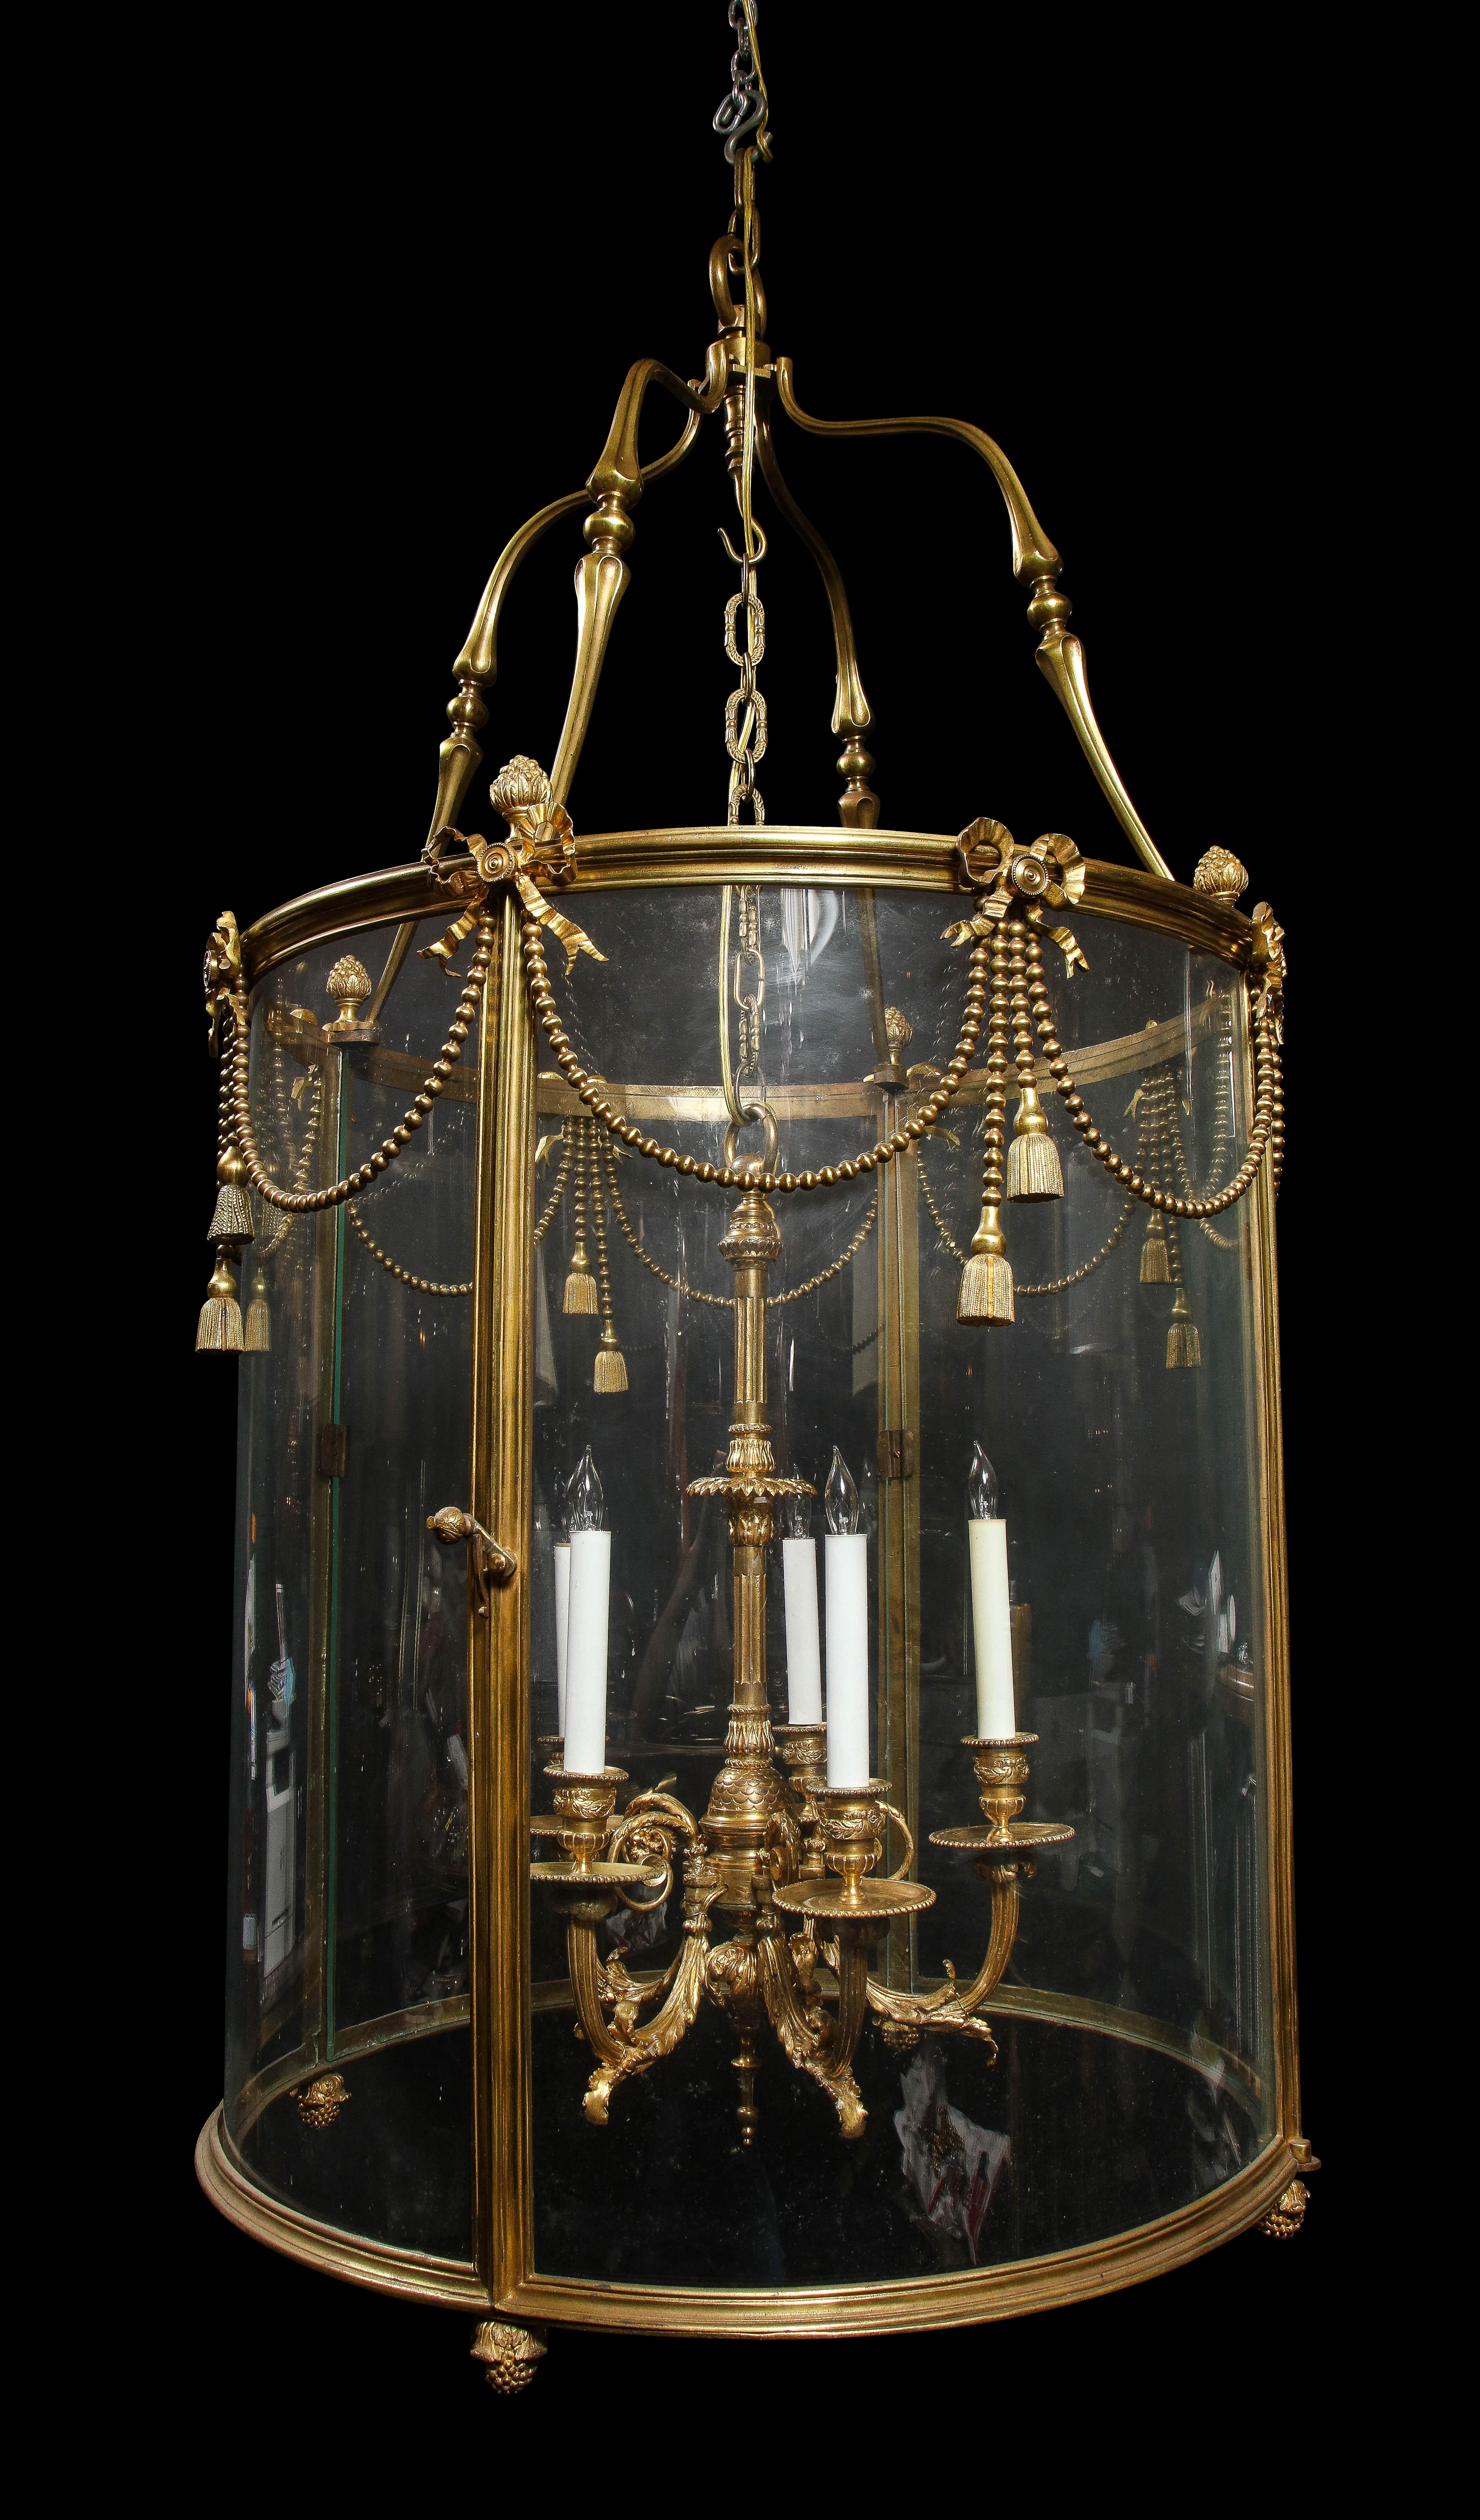 A palatial and monumental large antique French Louis XVI girl bronze multi light lantern of superb quality embellished with gilt bronze ribbons, tassels and further adorned with interior gilt bronze arms of exquisite detail.